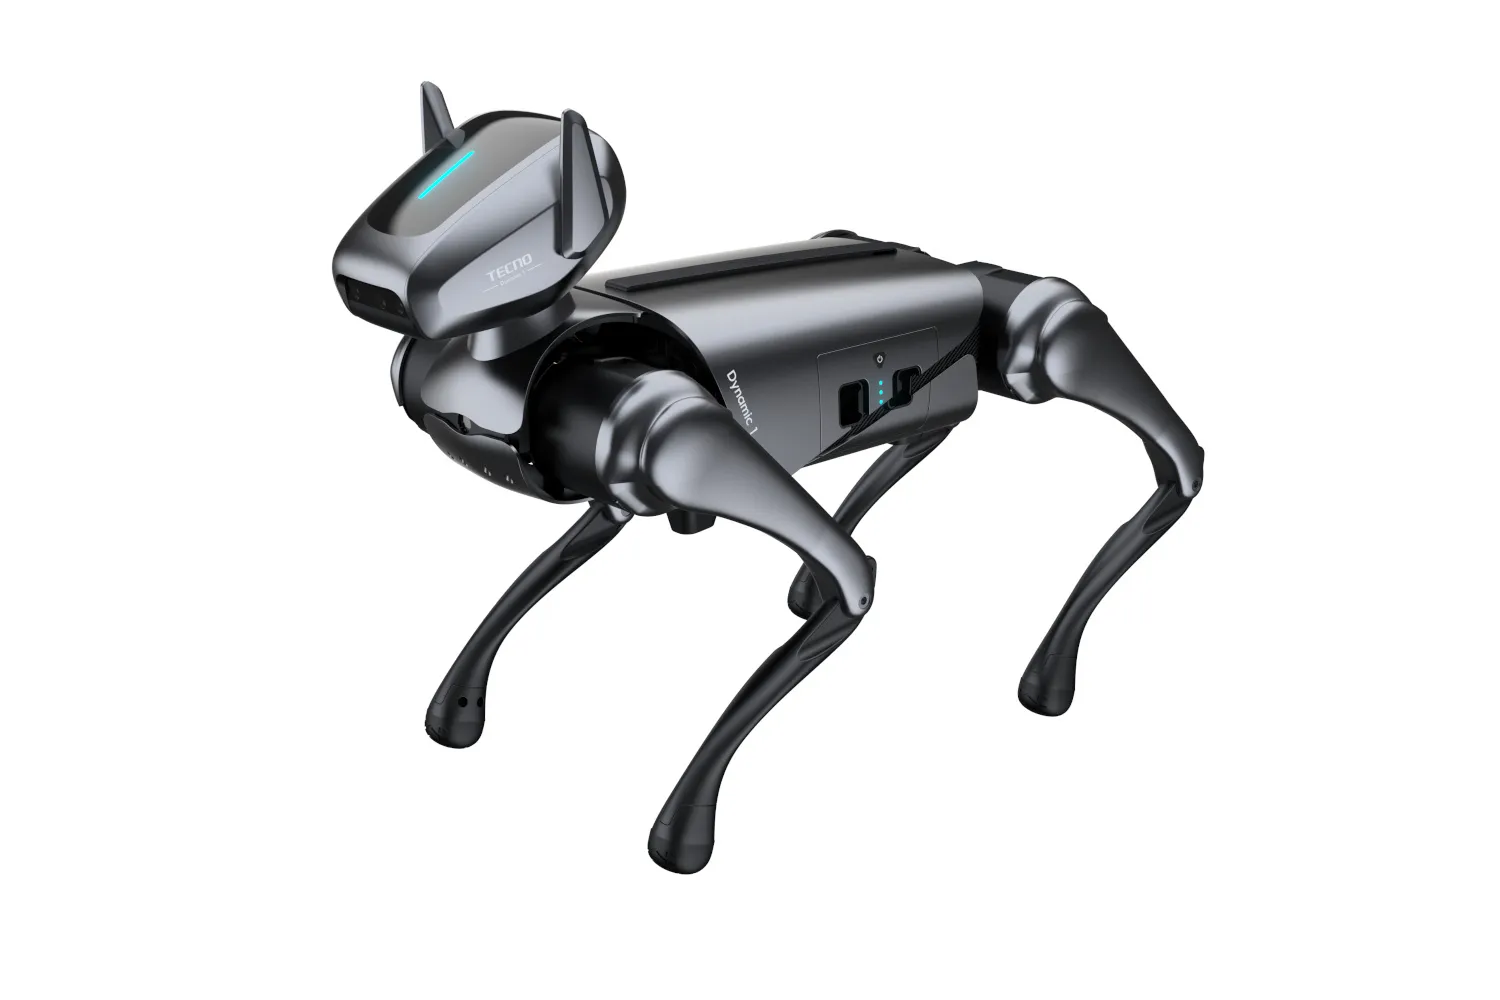 Tecno’s Dynamic 1 robot dog from another angle.